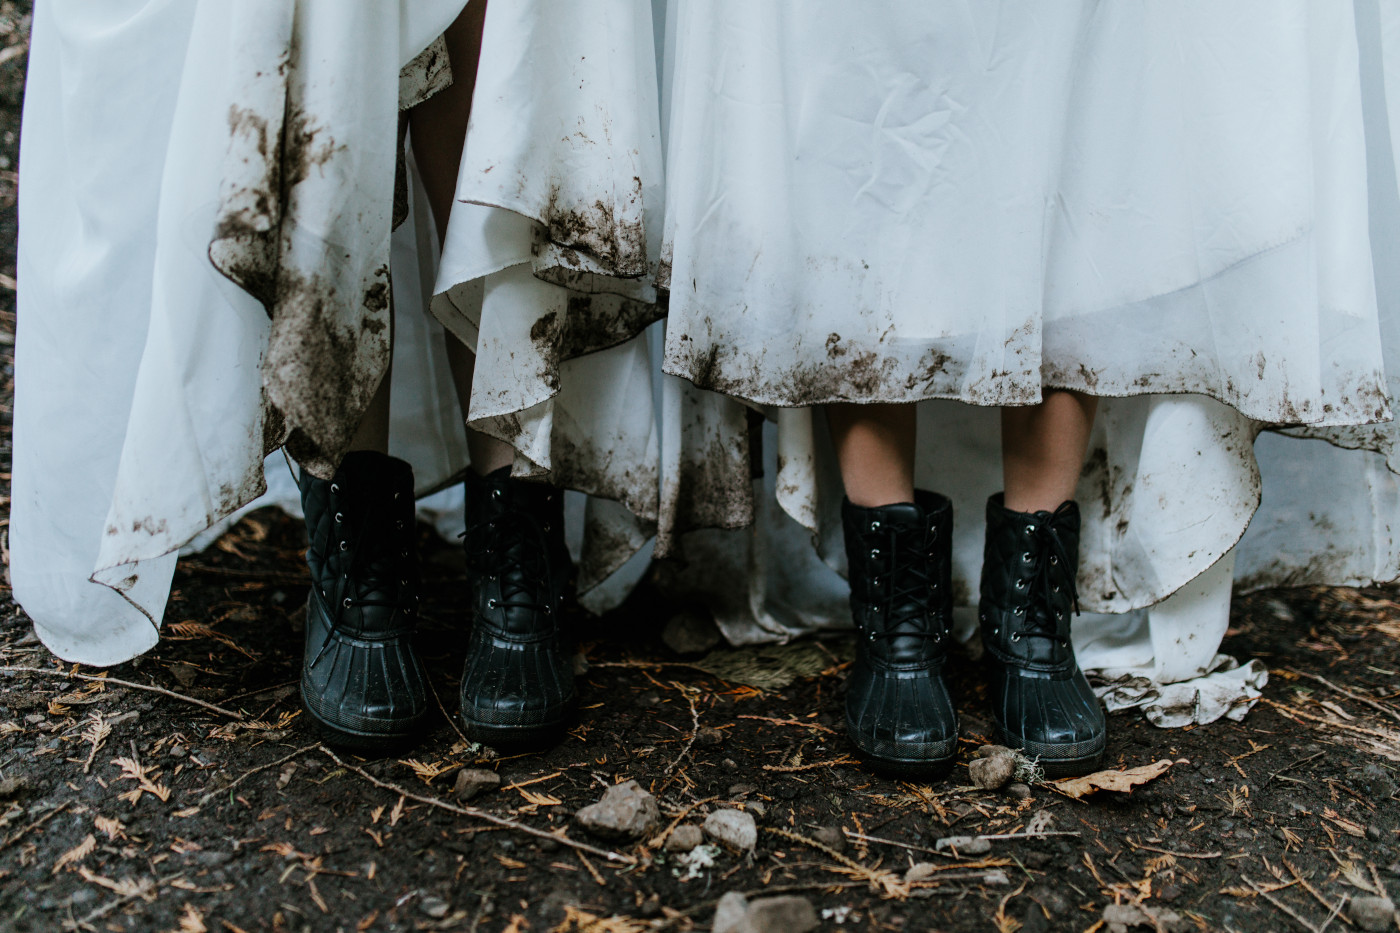 Hayley and Tiffany show off their muddy boots from hiking. Elopement photography at the Columbia River Gorge by Sienna Plus Josh.